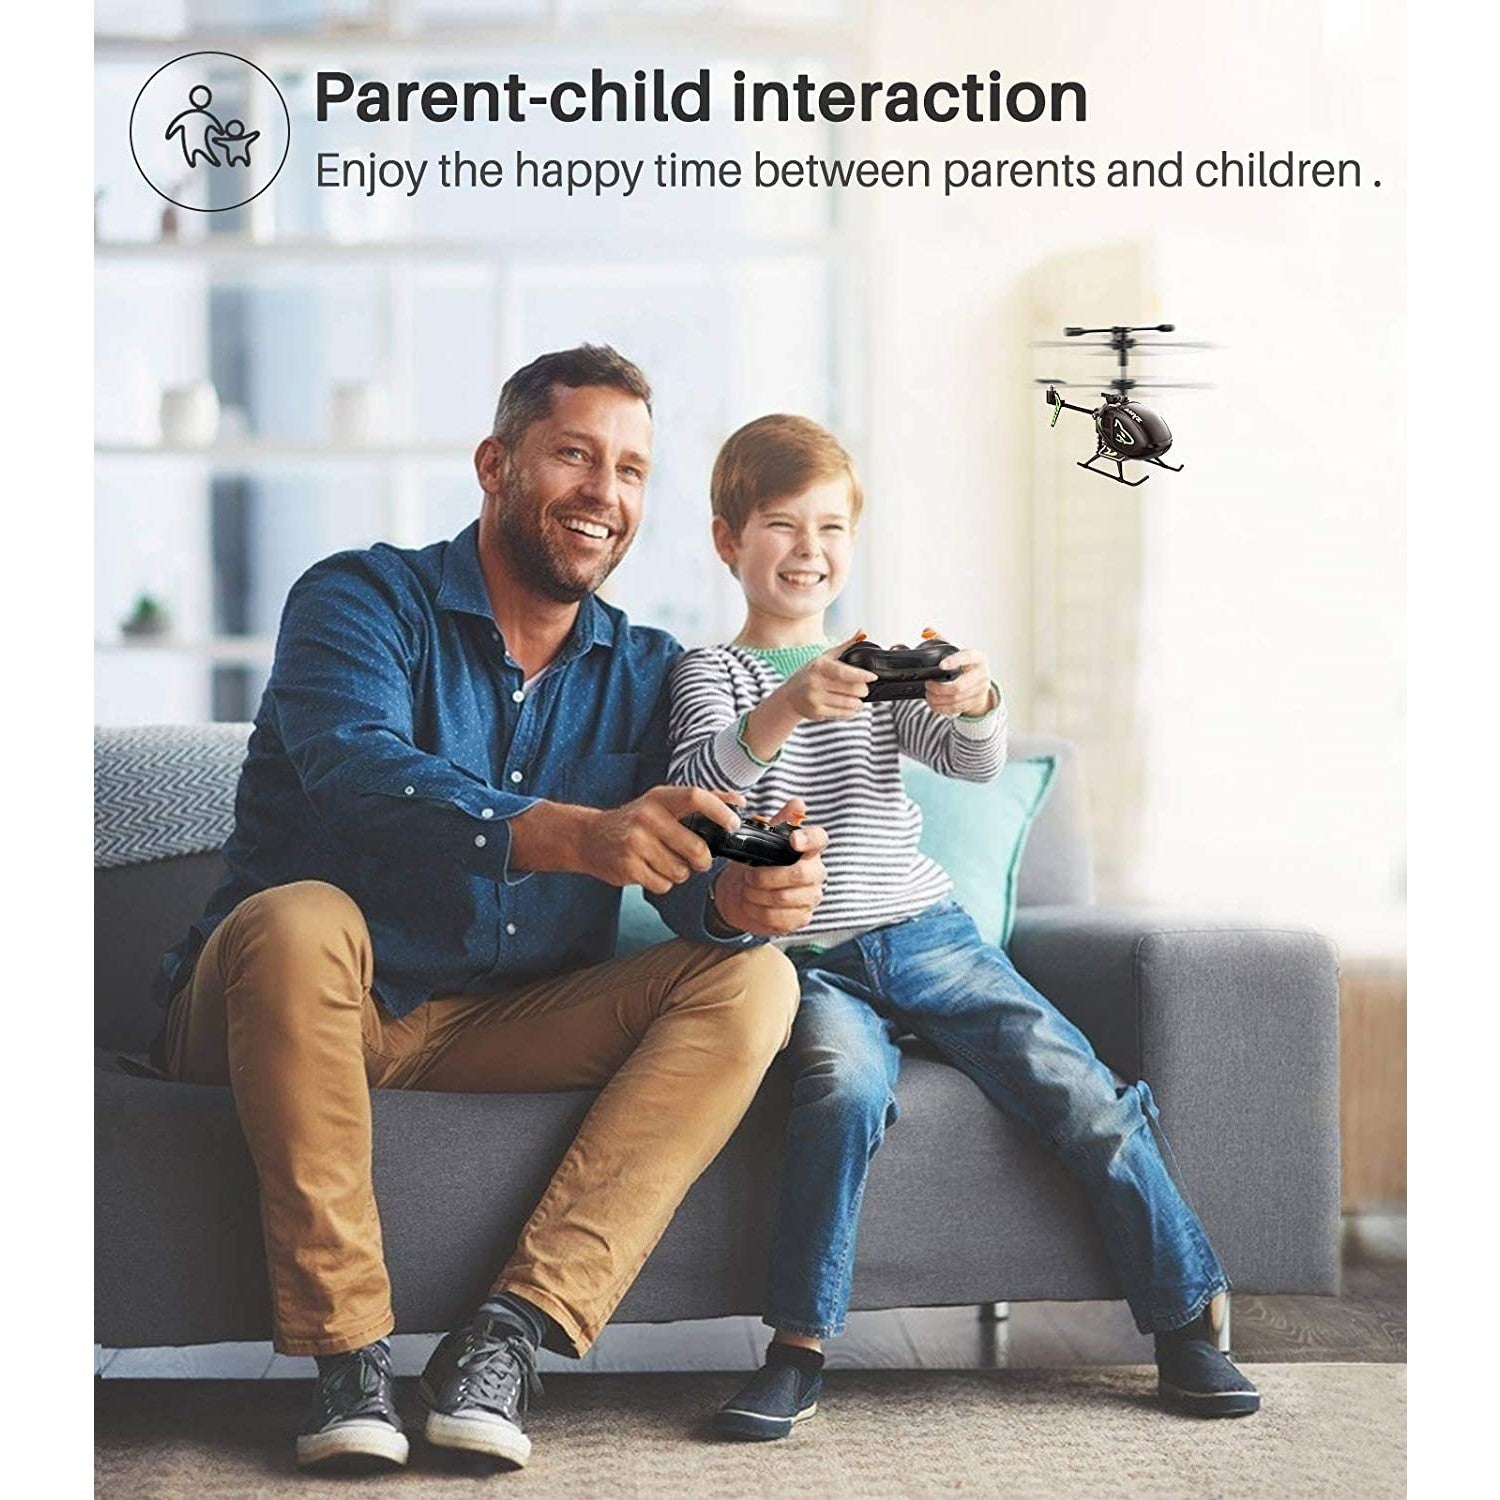 A man and child are holding remote controllers and playing with a mini RC helicopter.